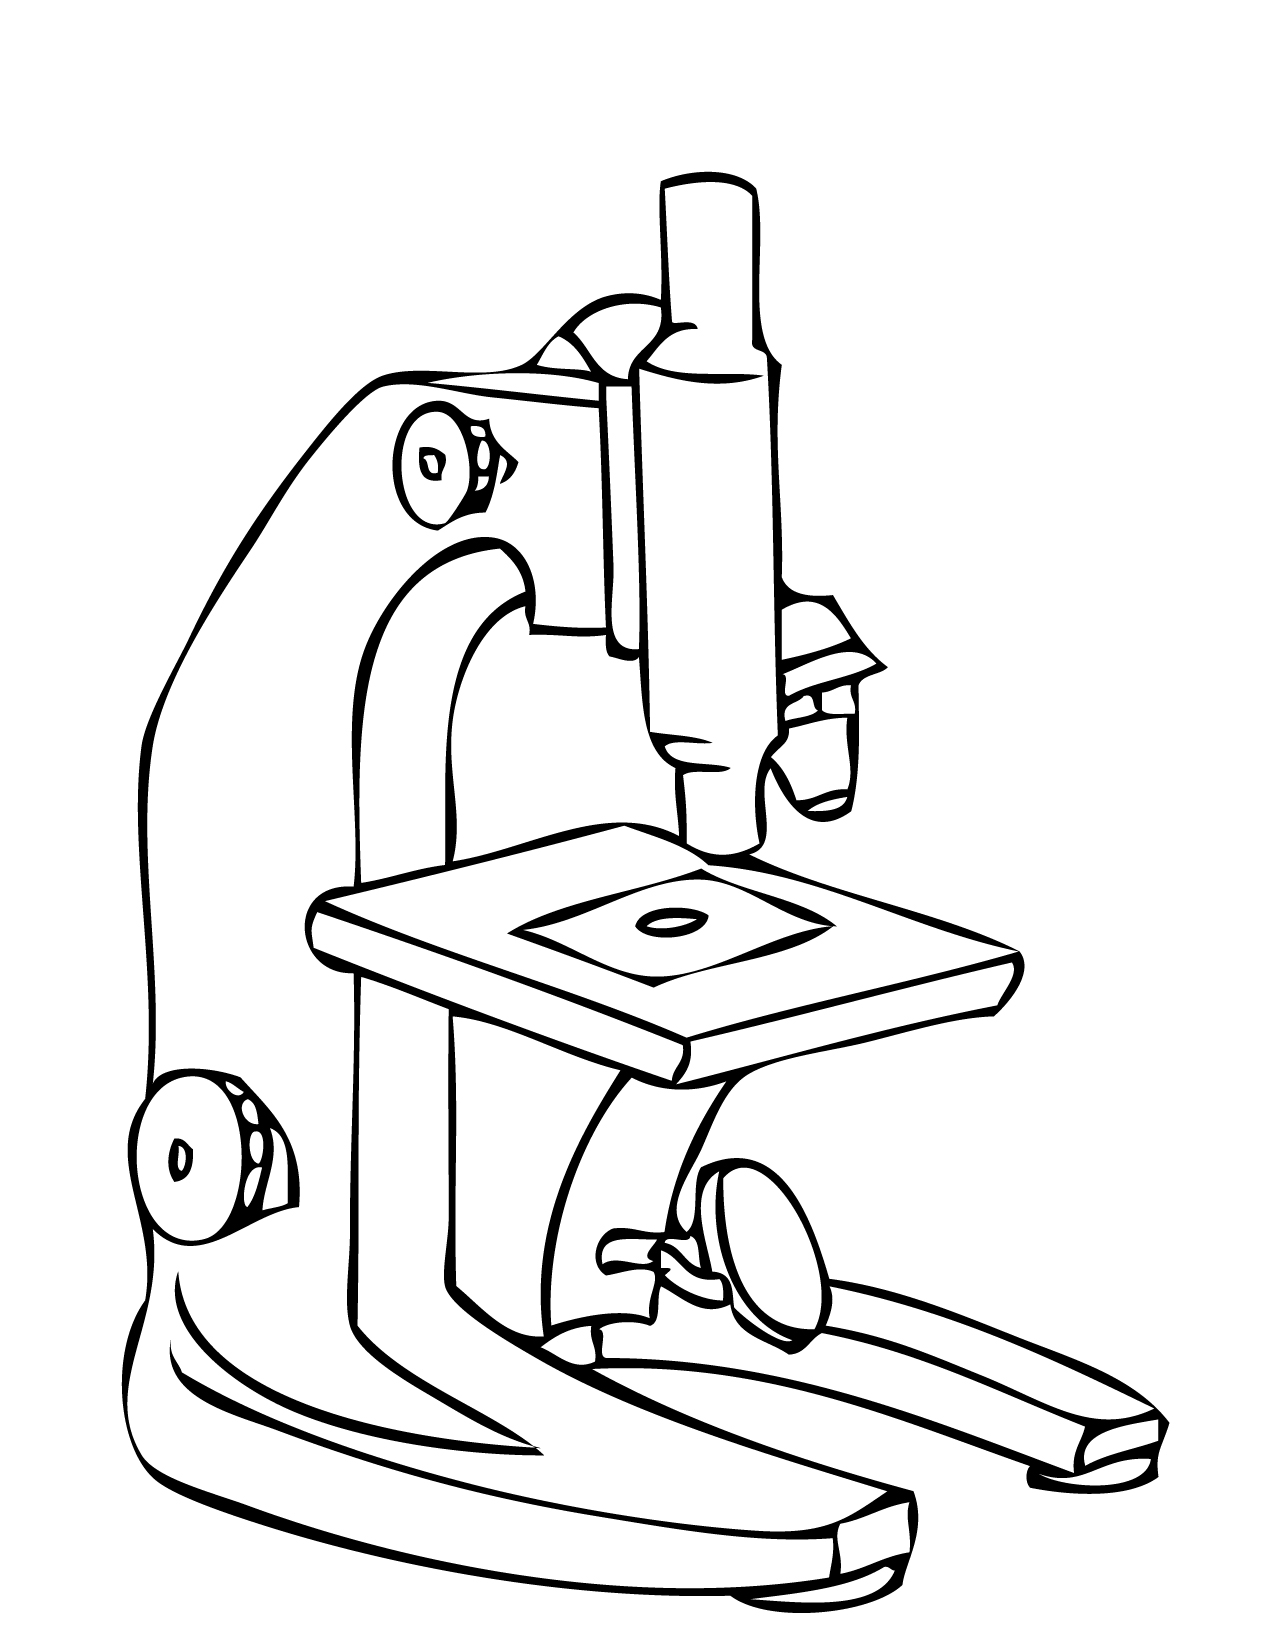 In The Lab Coloring Pages - Handipoints